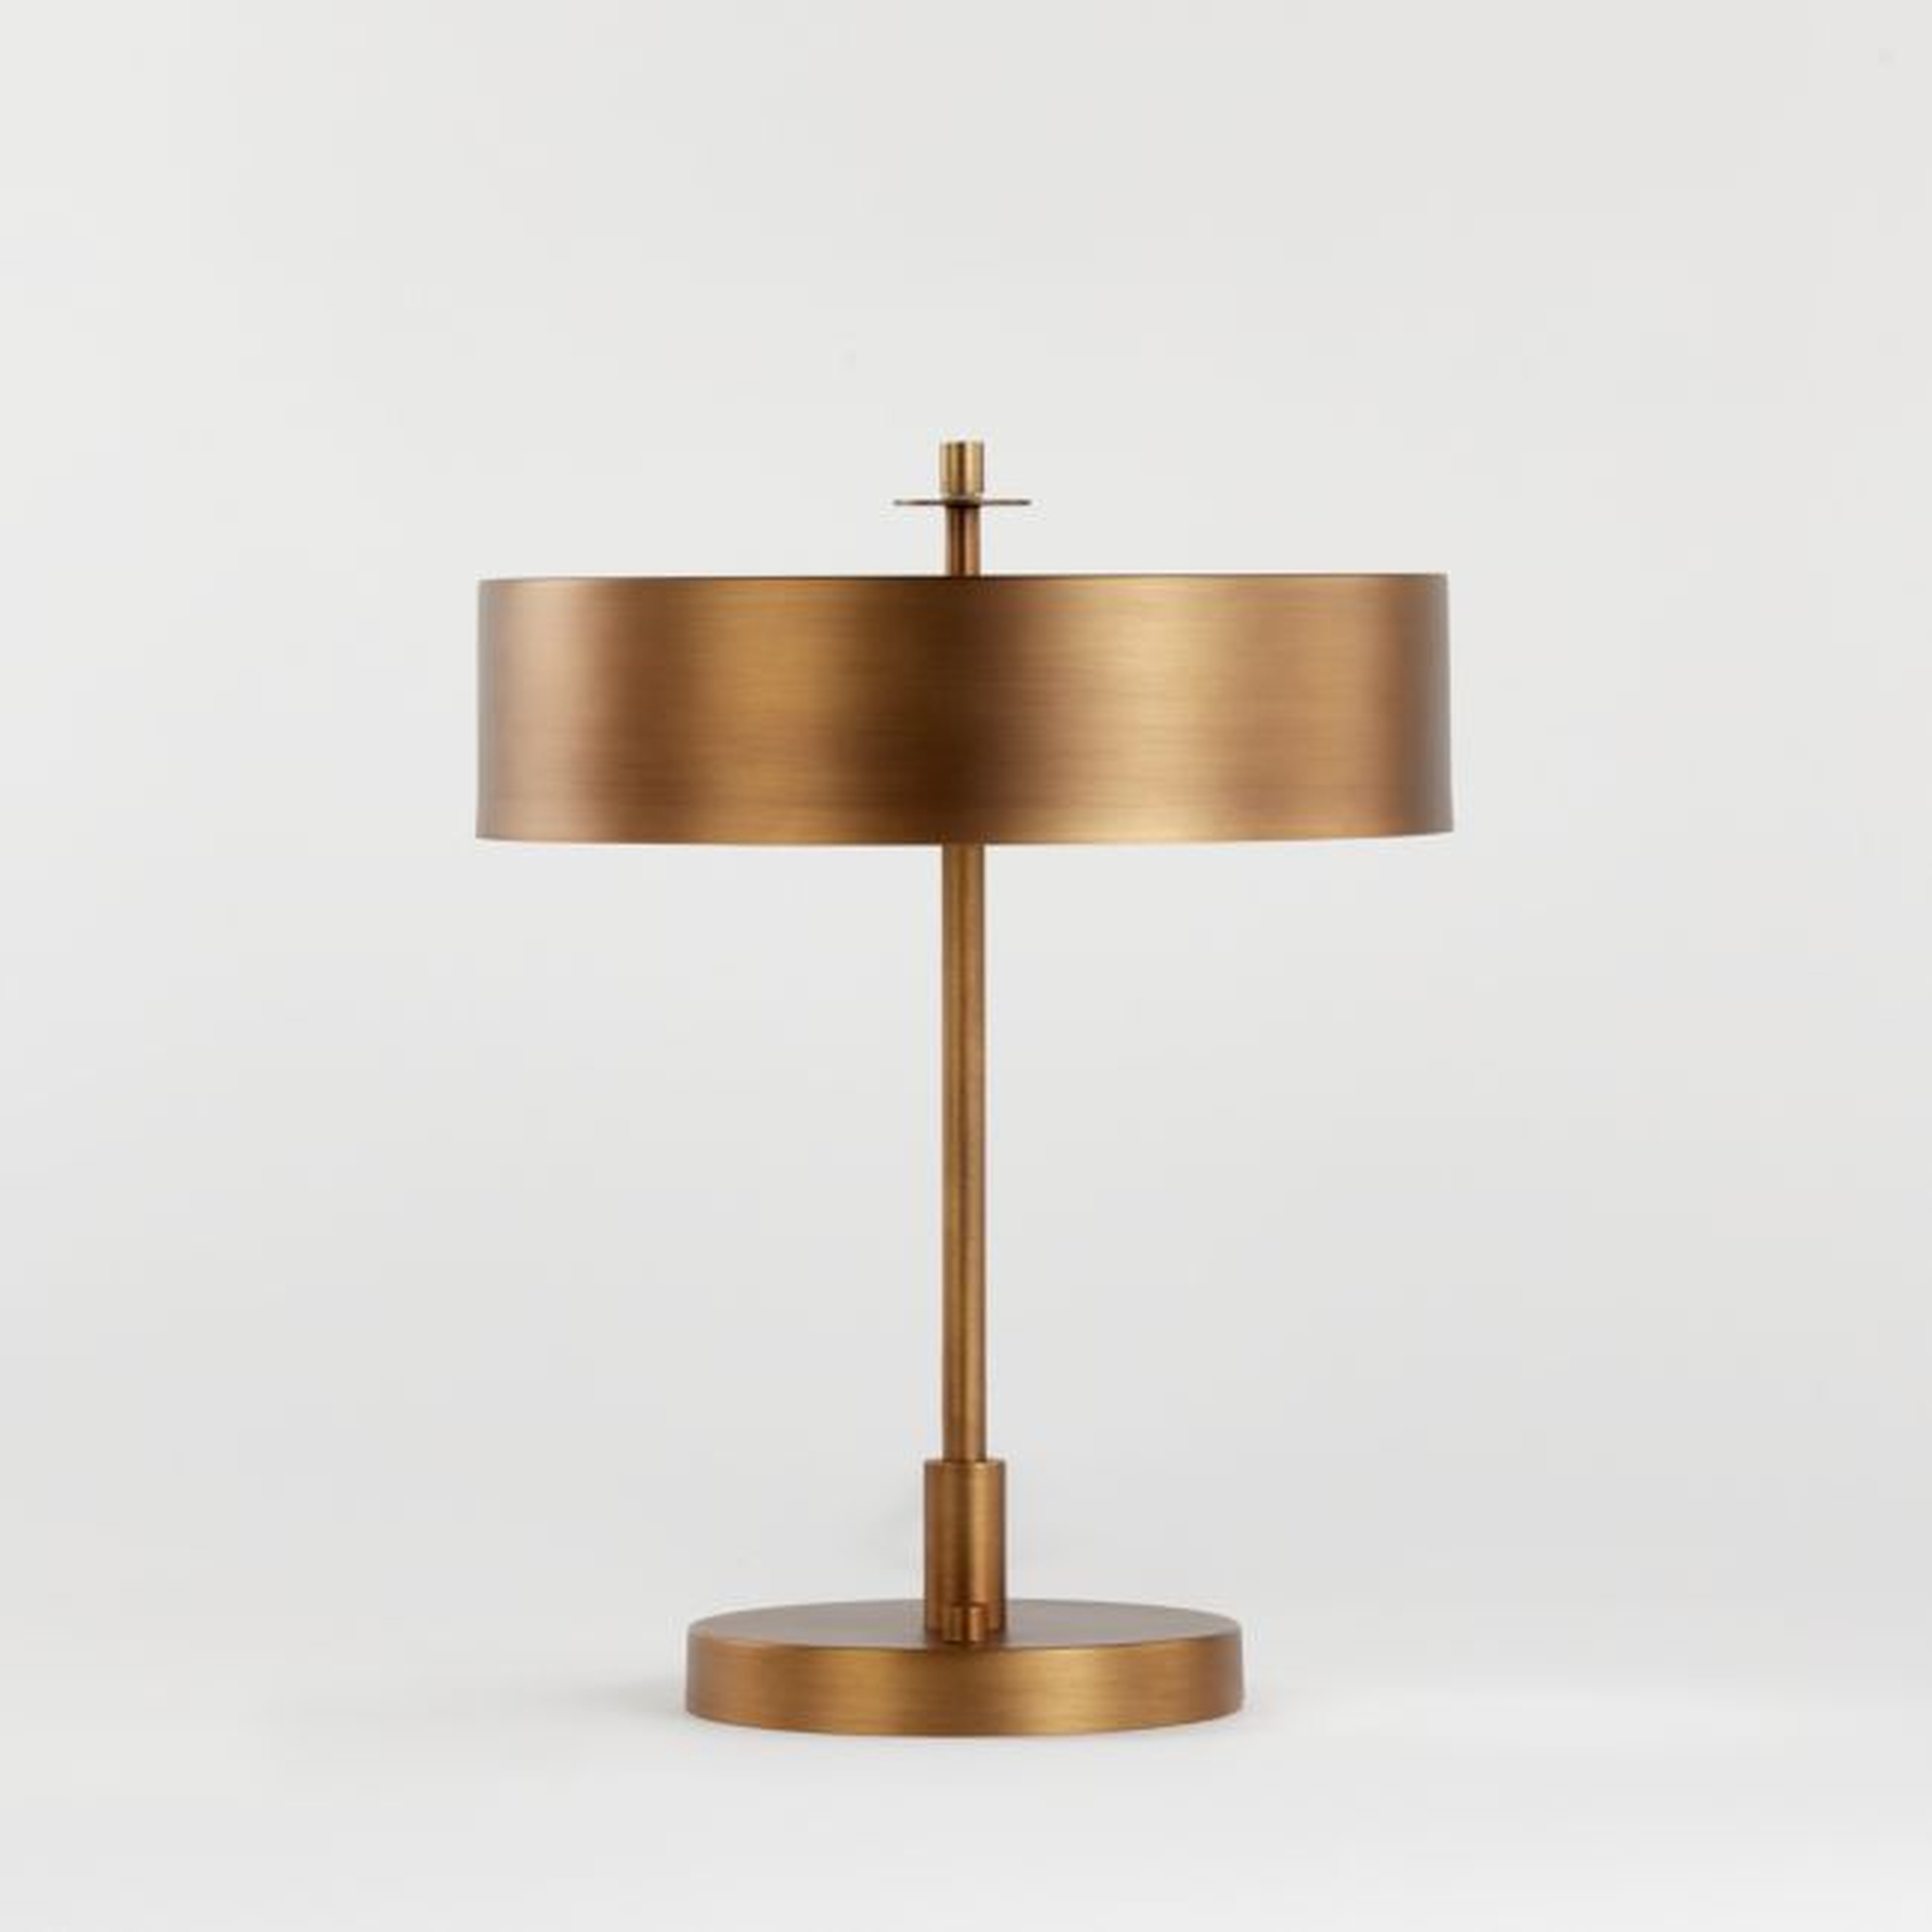 Zain Brass Table Lamp with USB Port - Crate and Barrel